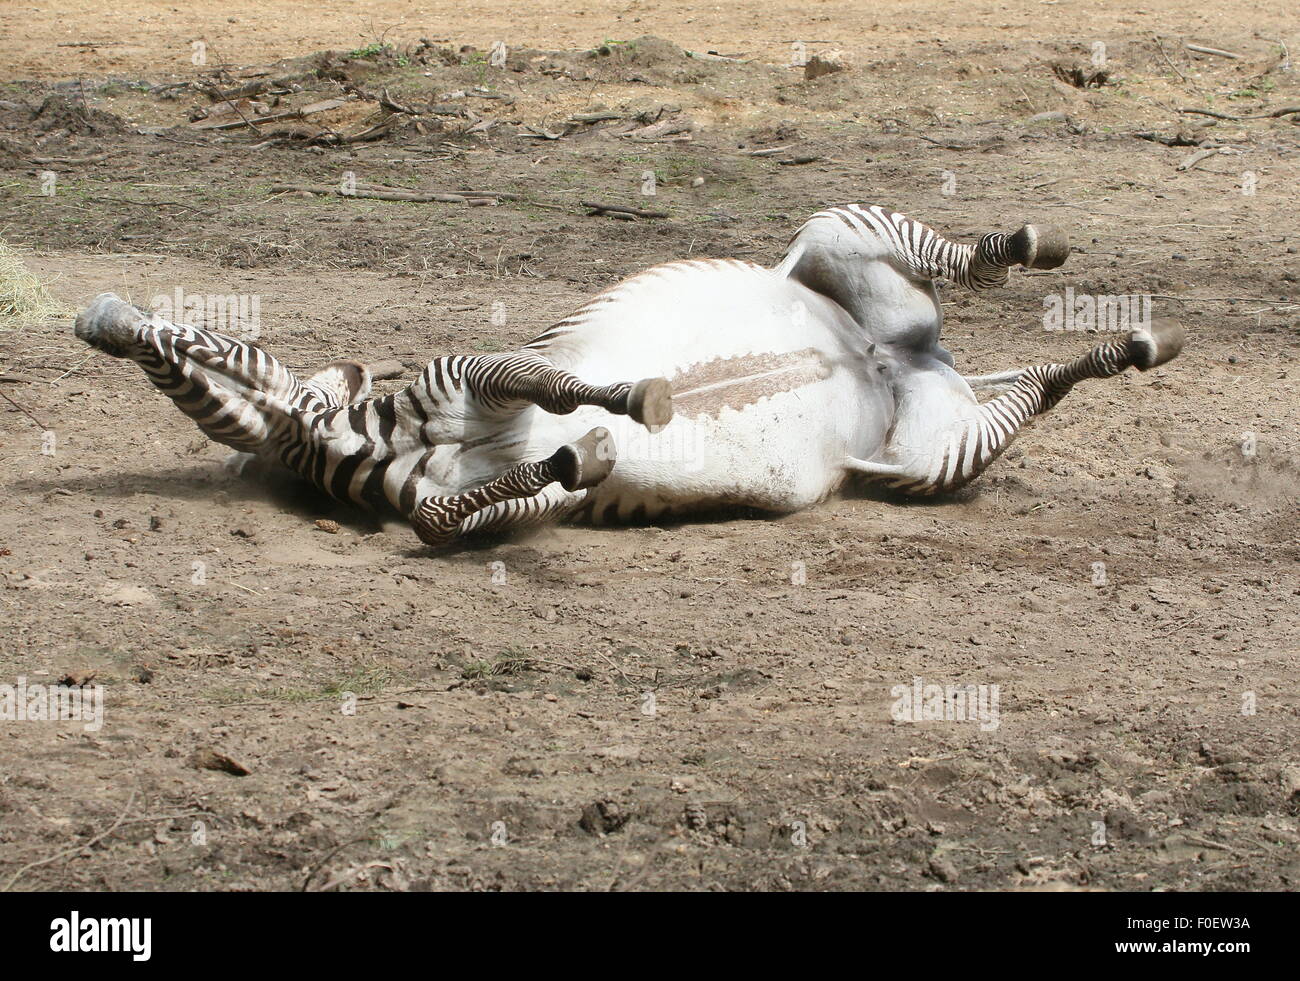 Mature female East African Grévy's zebra or Imperial zebra (Equus grevyi) lying on ground, rolling on her back, taking mud bath Stock Photo